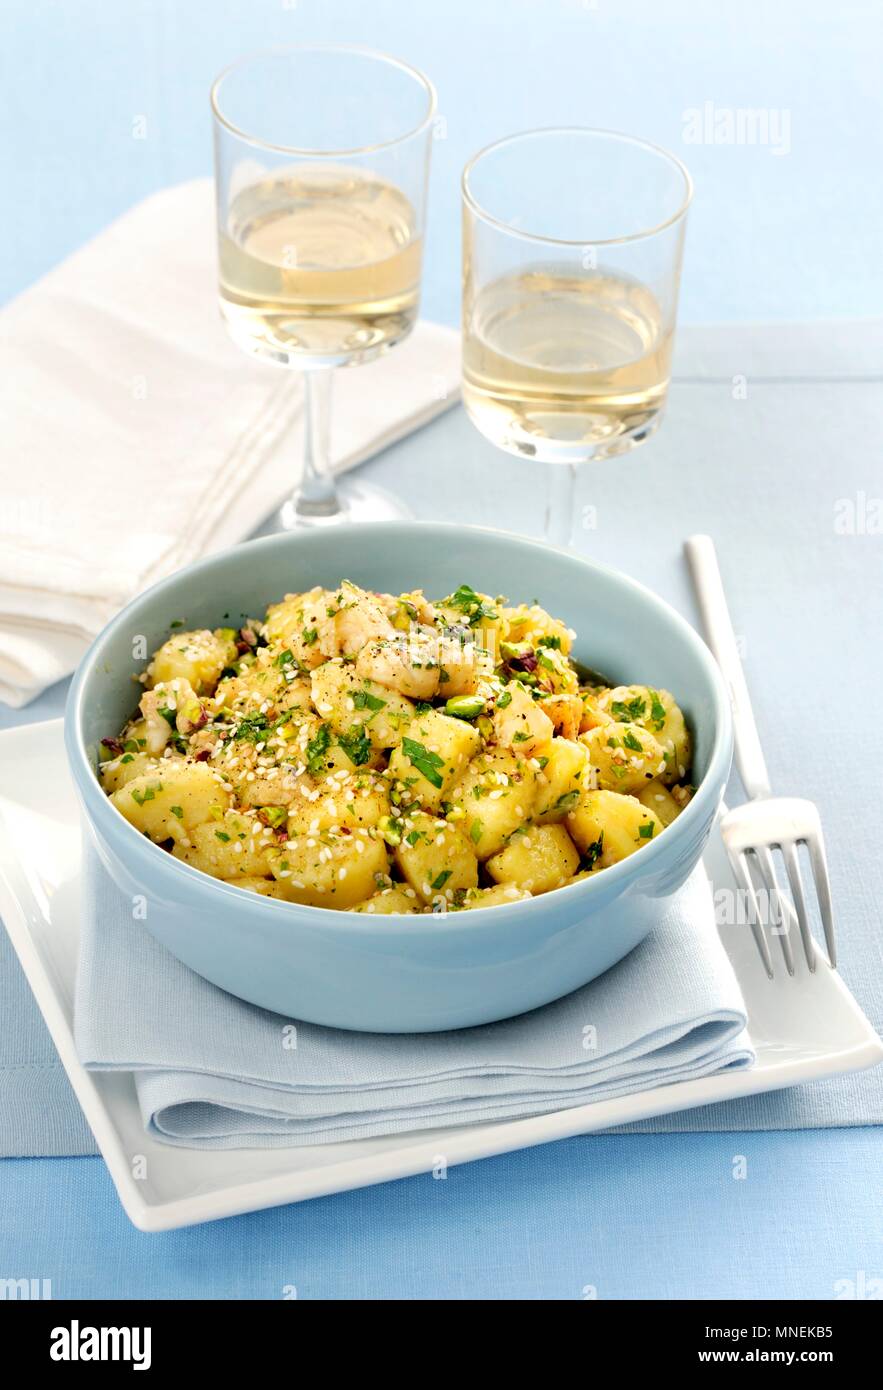 Gnocchi al ragù di mare (gnocchi with seafood ragout, pistachios and sesame seeds, Italy) Stock Photo